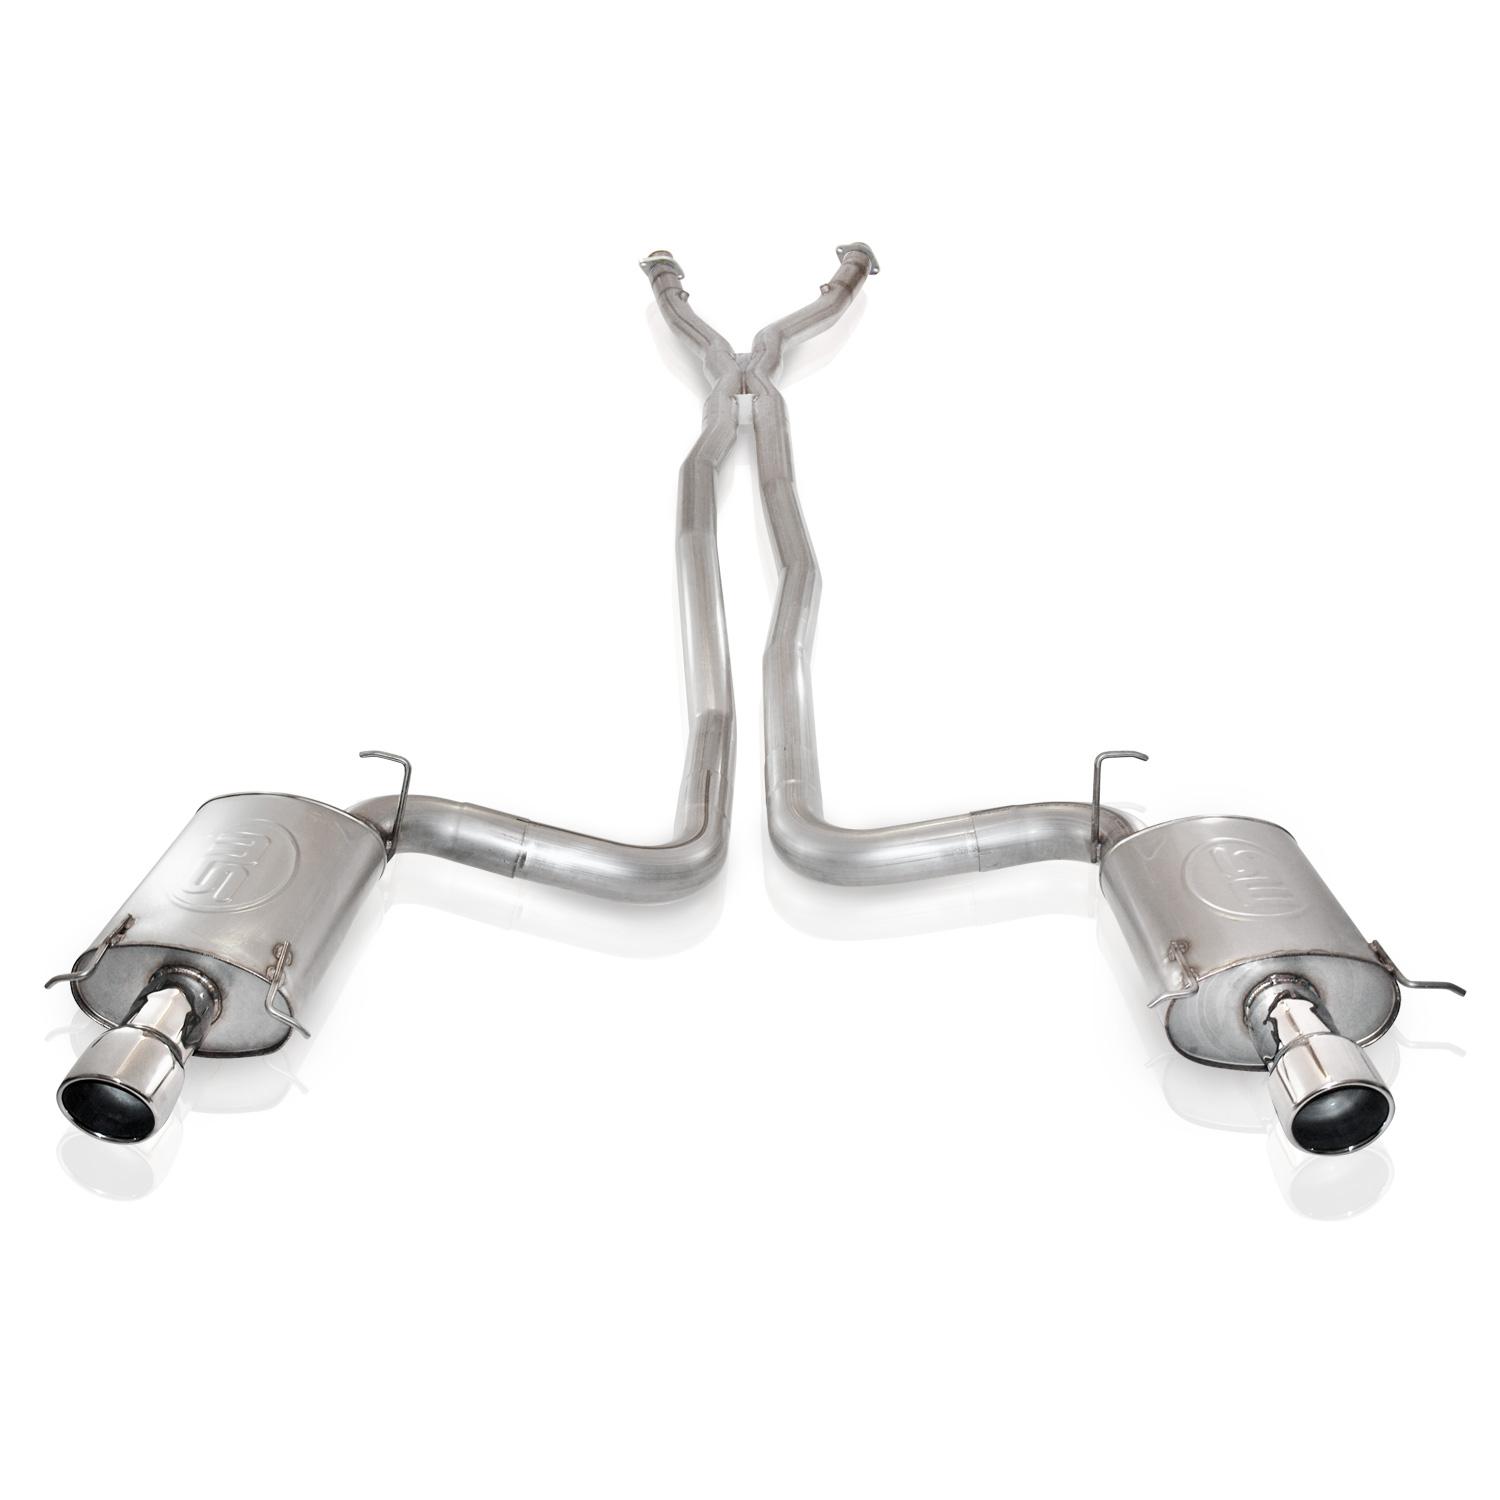 2004-2007 Cadillac CTS-V Stainless Works Catback Exhaust System w/HighFlow Cats Xpipe (For Factory Connection)